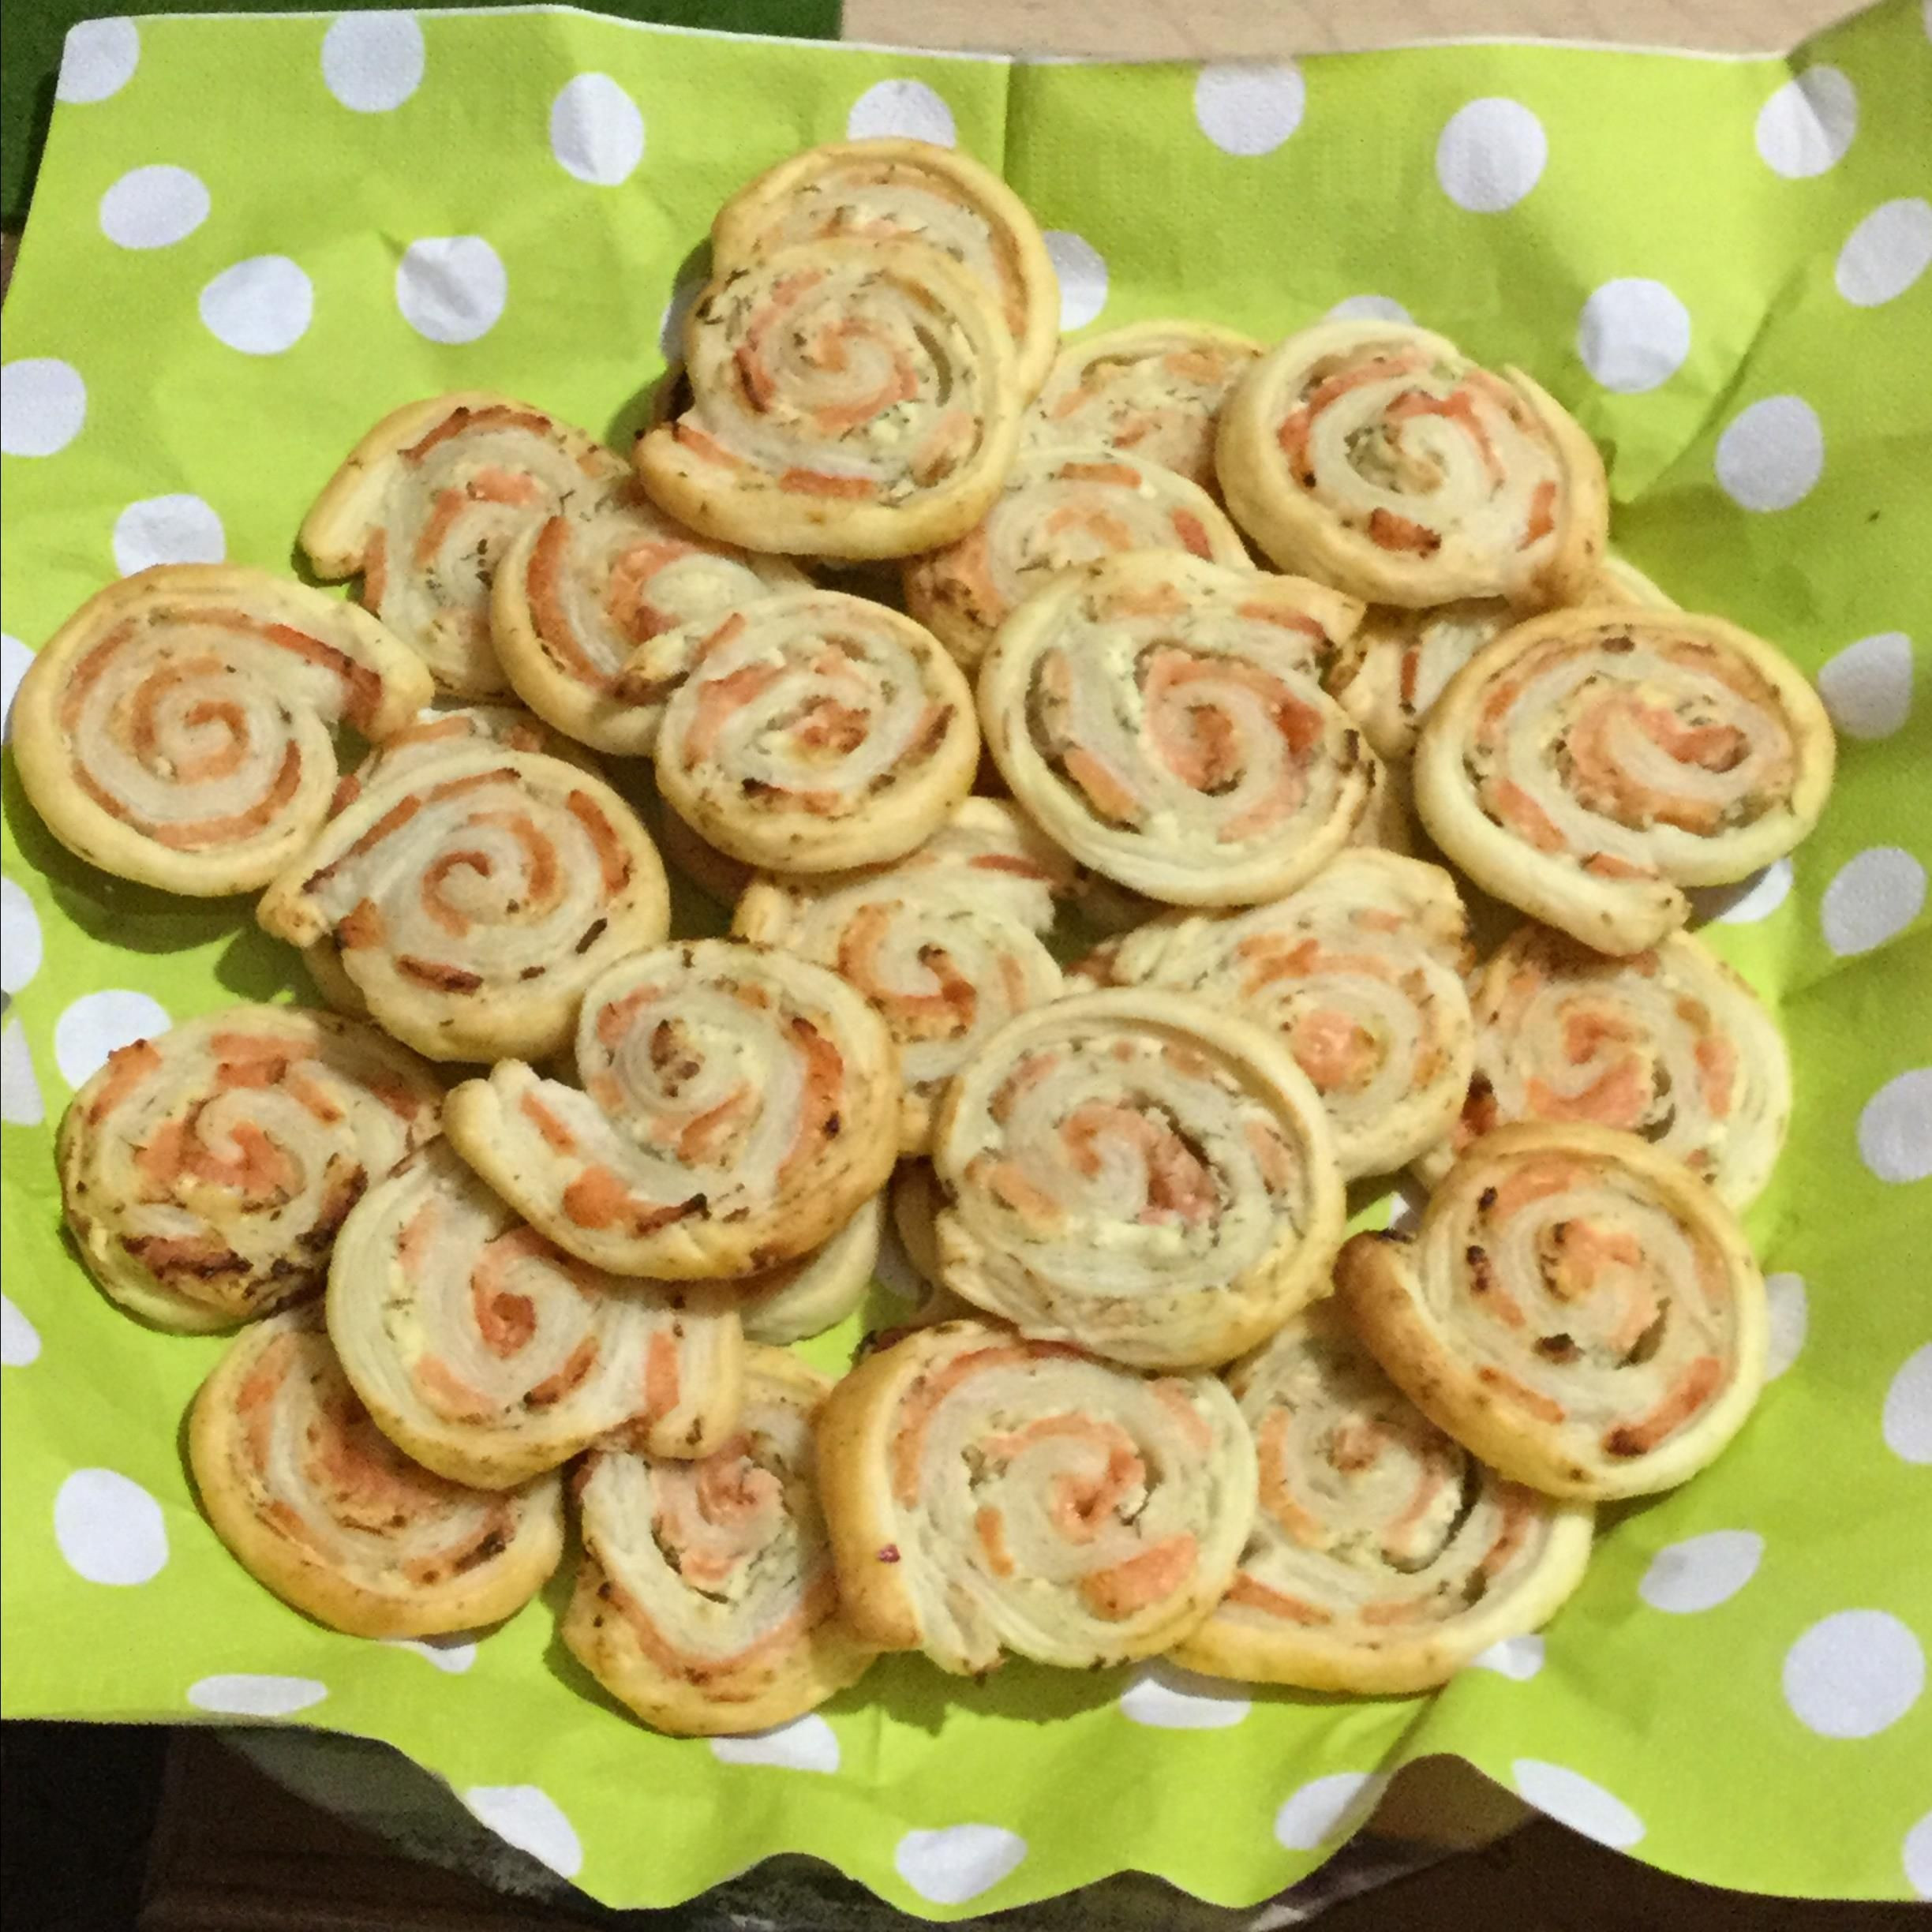 Smoked Salmon Appetizers Allrecipes
 Puff Pastry Pinwheels with Smoked Salmon and Cream Cheese